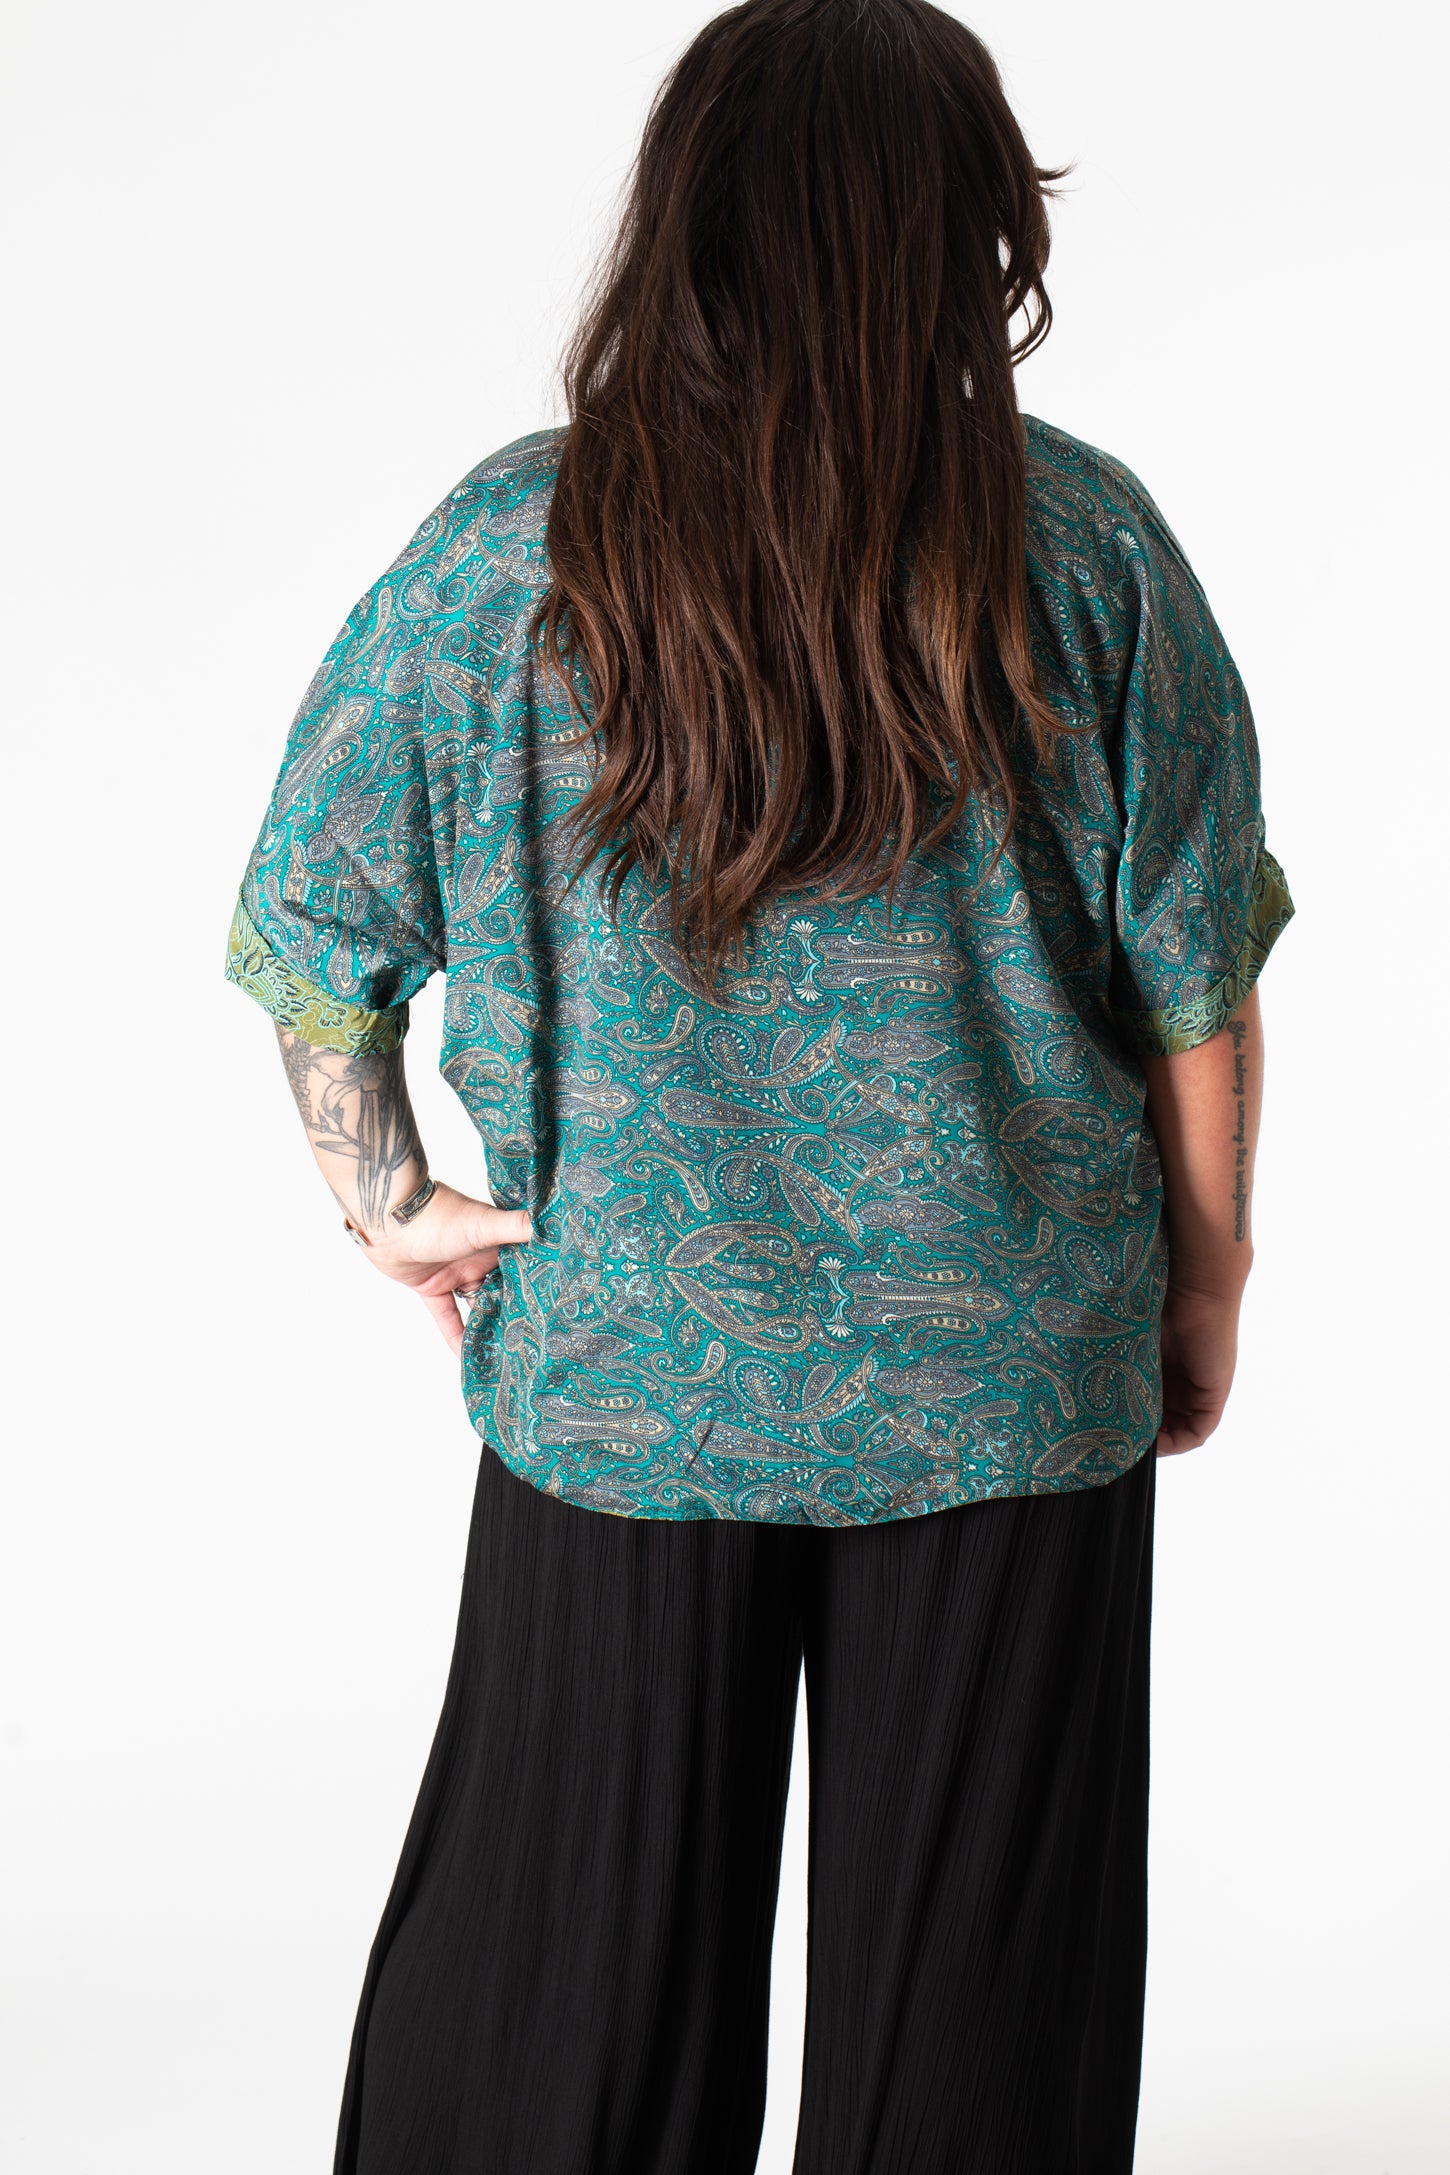 Sari Inspired Reversible Butterfly Top